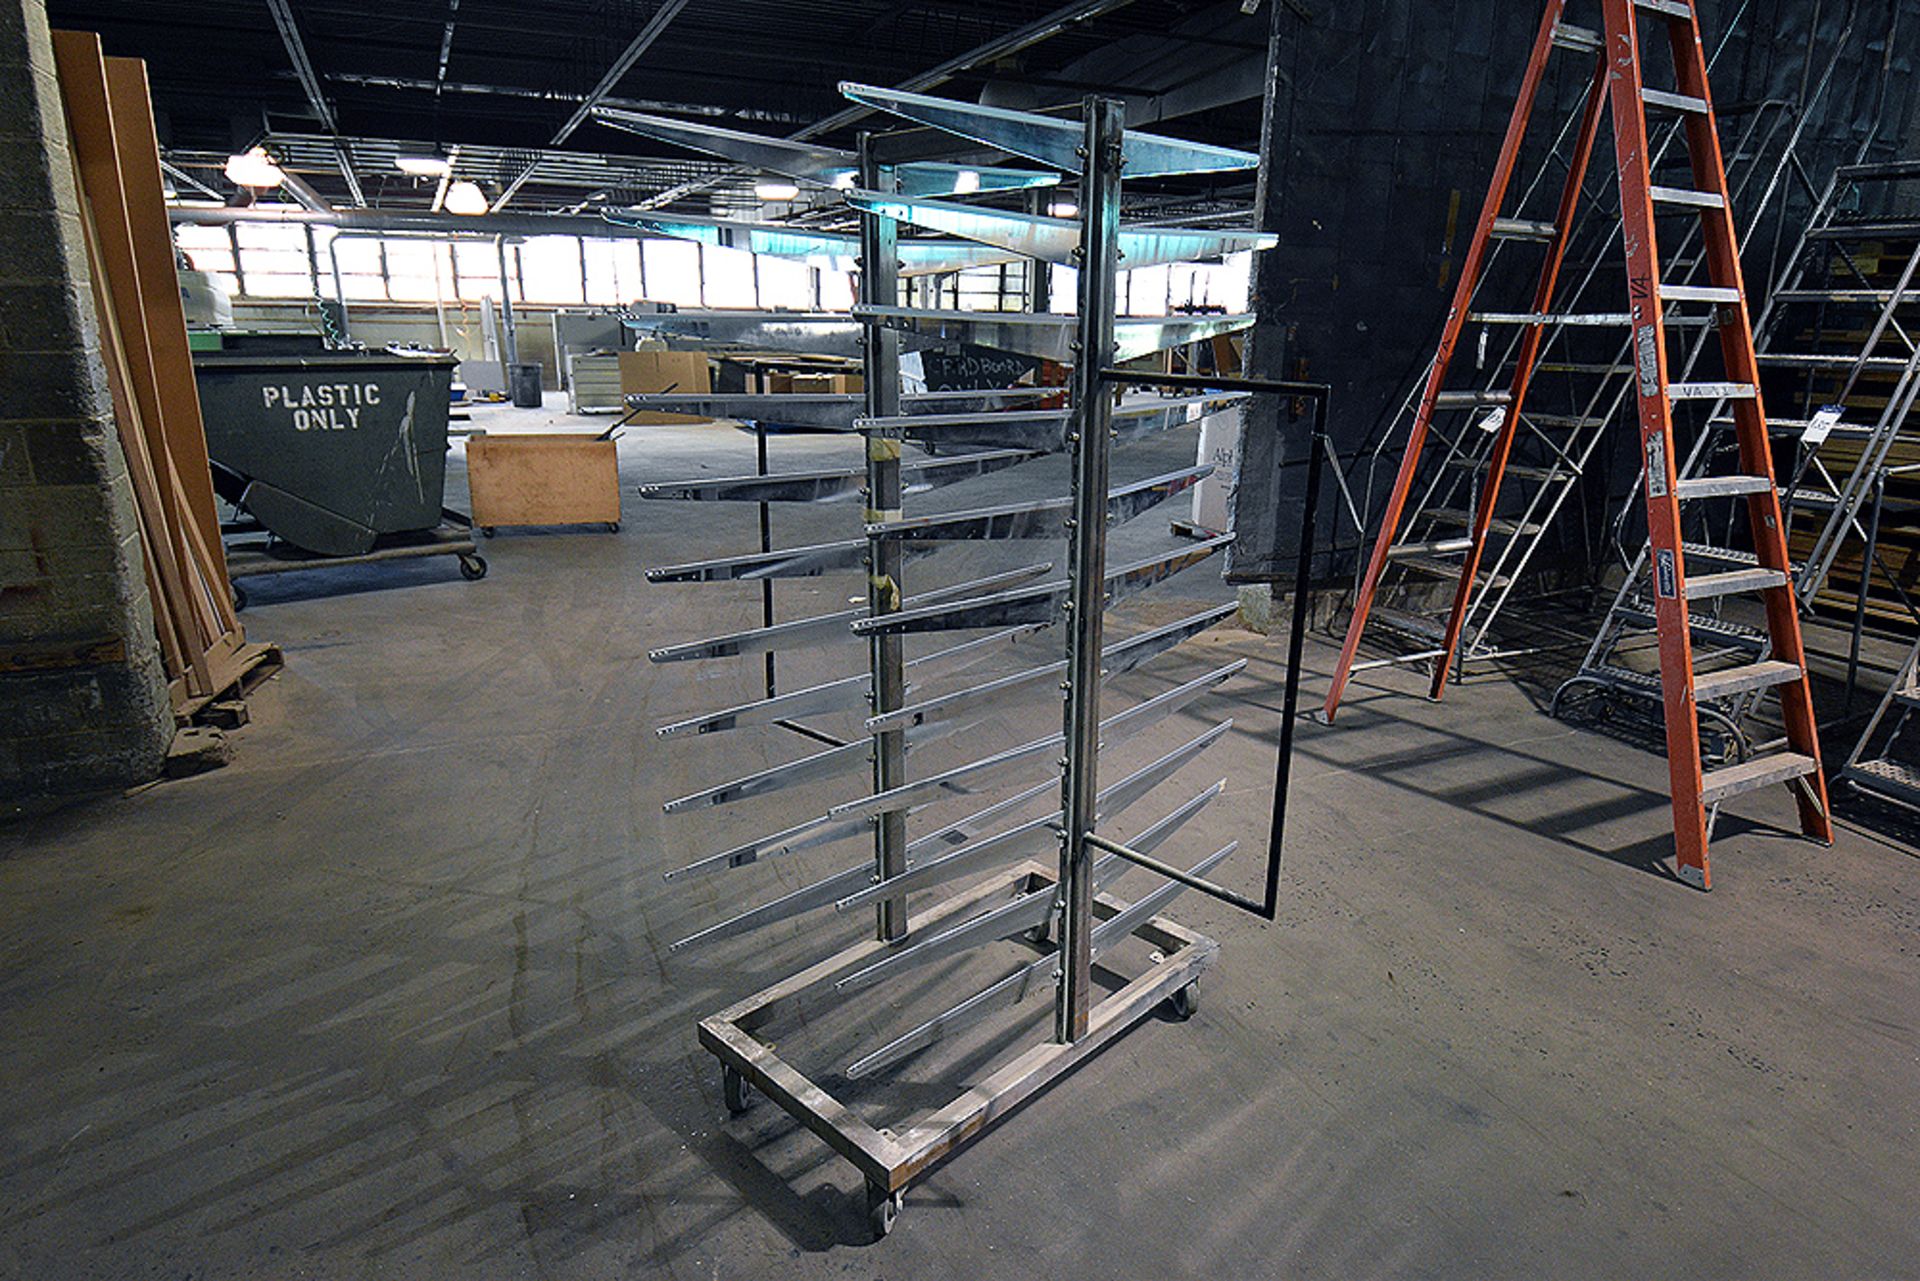 12-tier Double-sided Drying Racks on Casters - Image 2 of 2